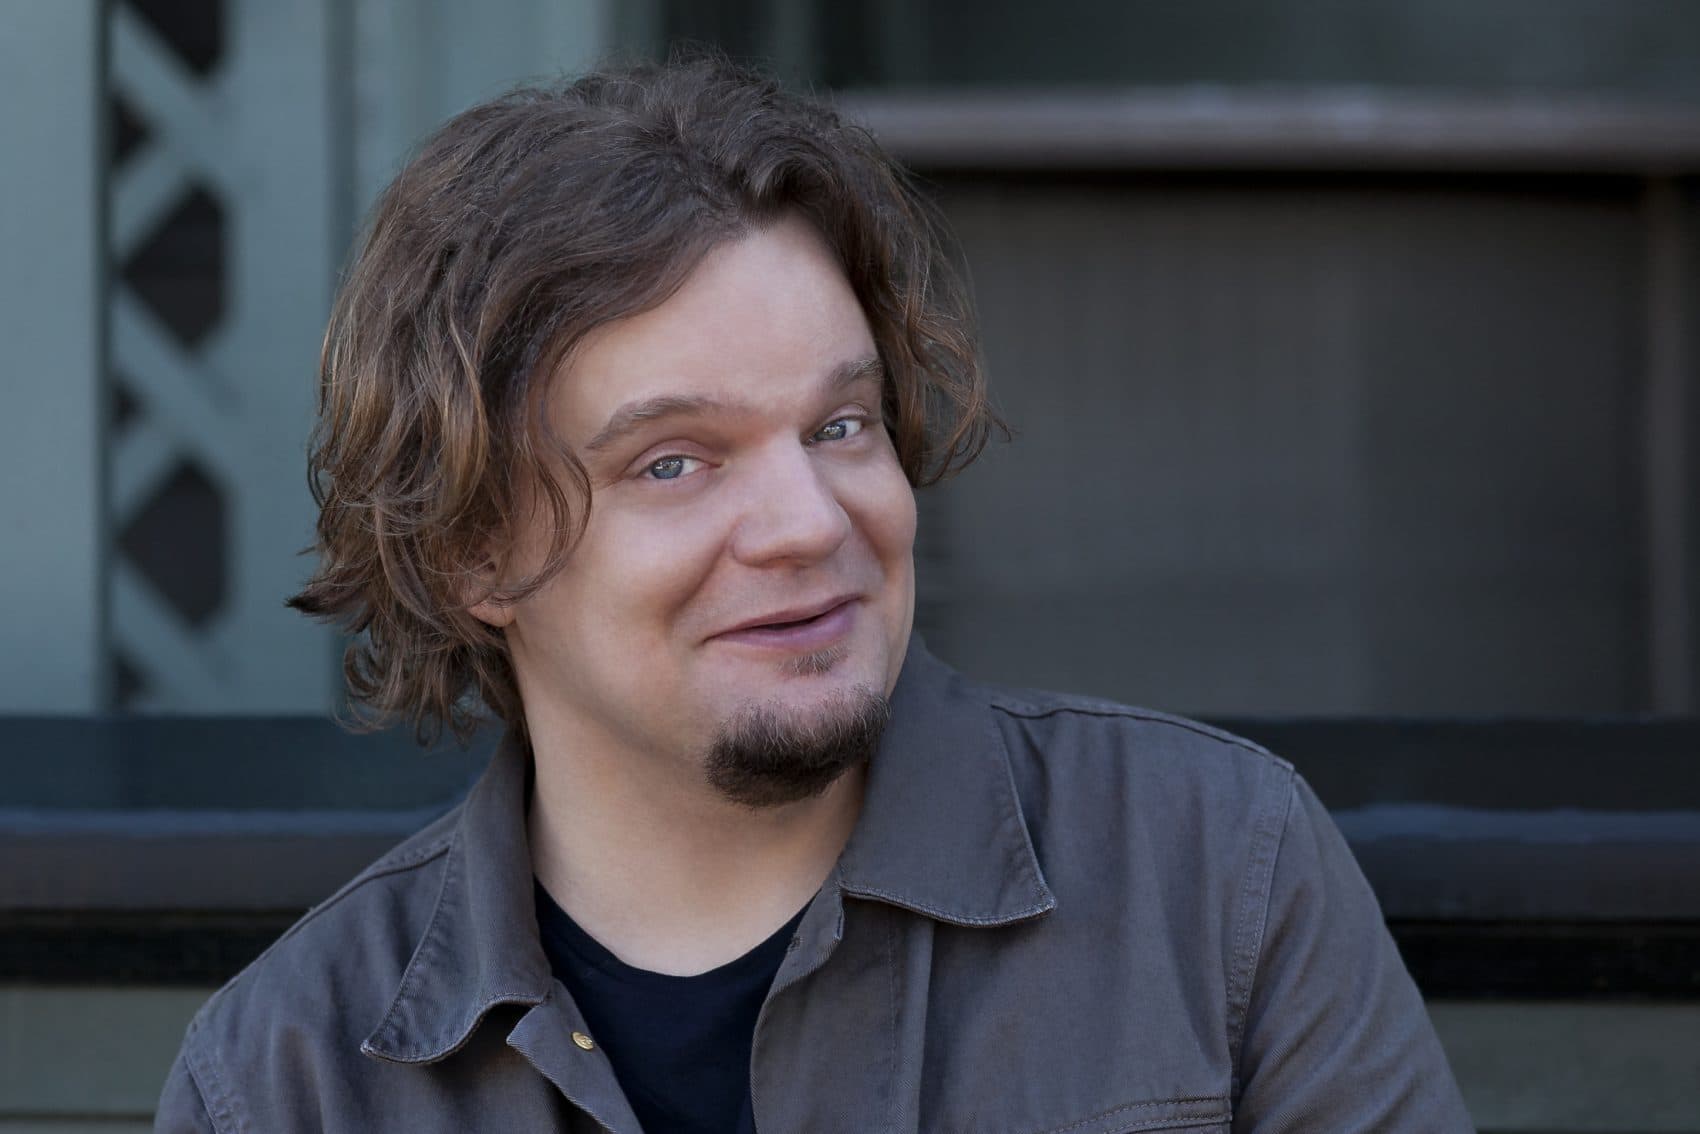 StandUp Comedian Ismo Leikola Brings Finnish Perspective To U.S